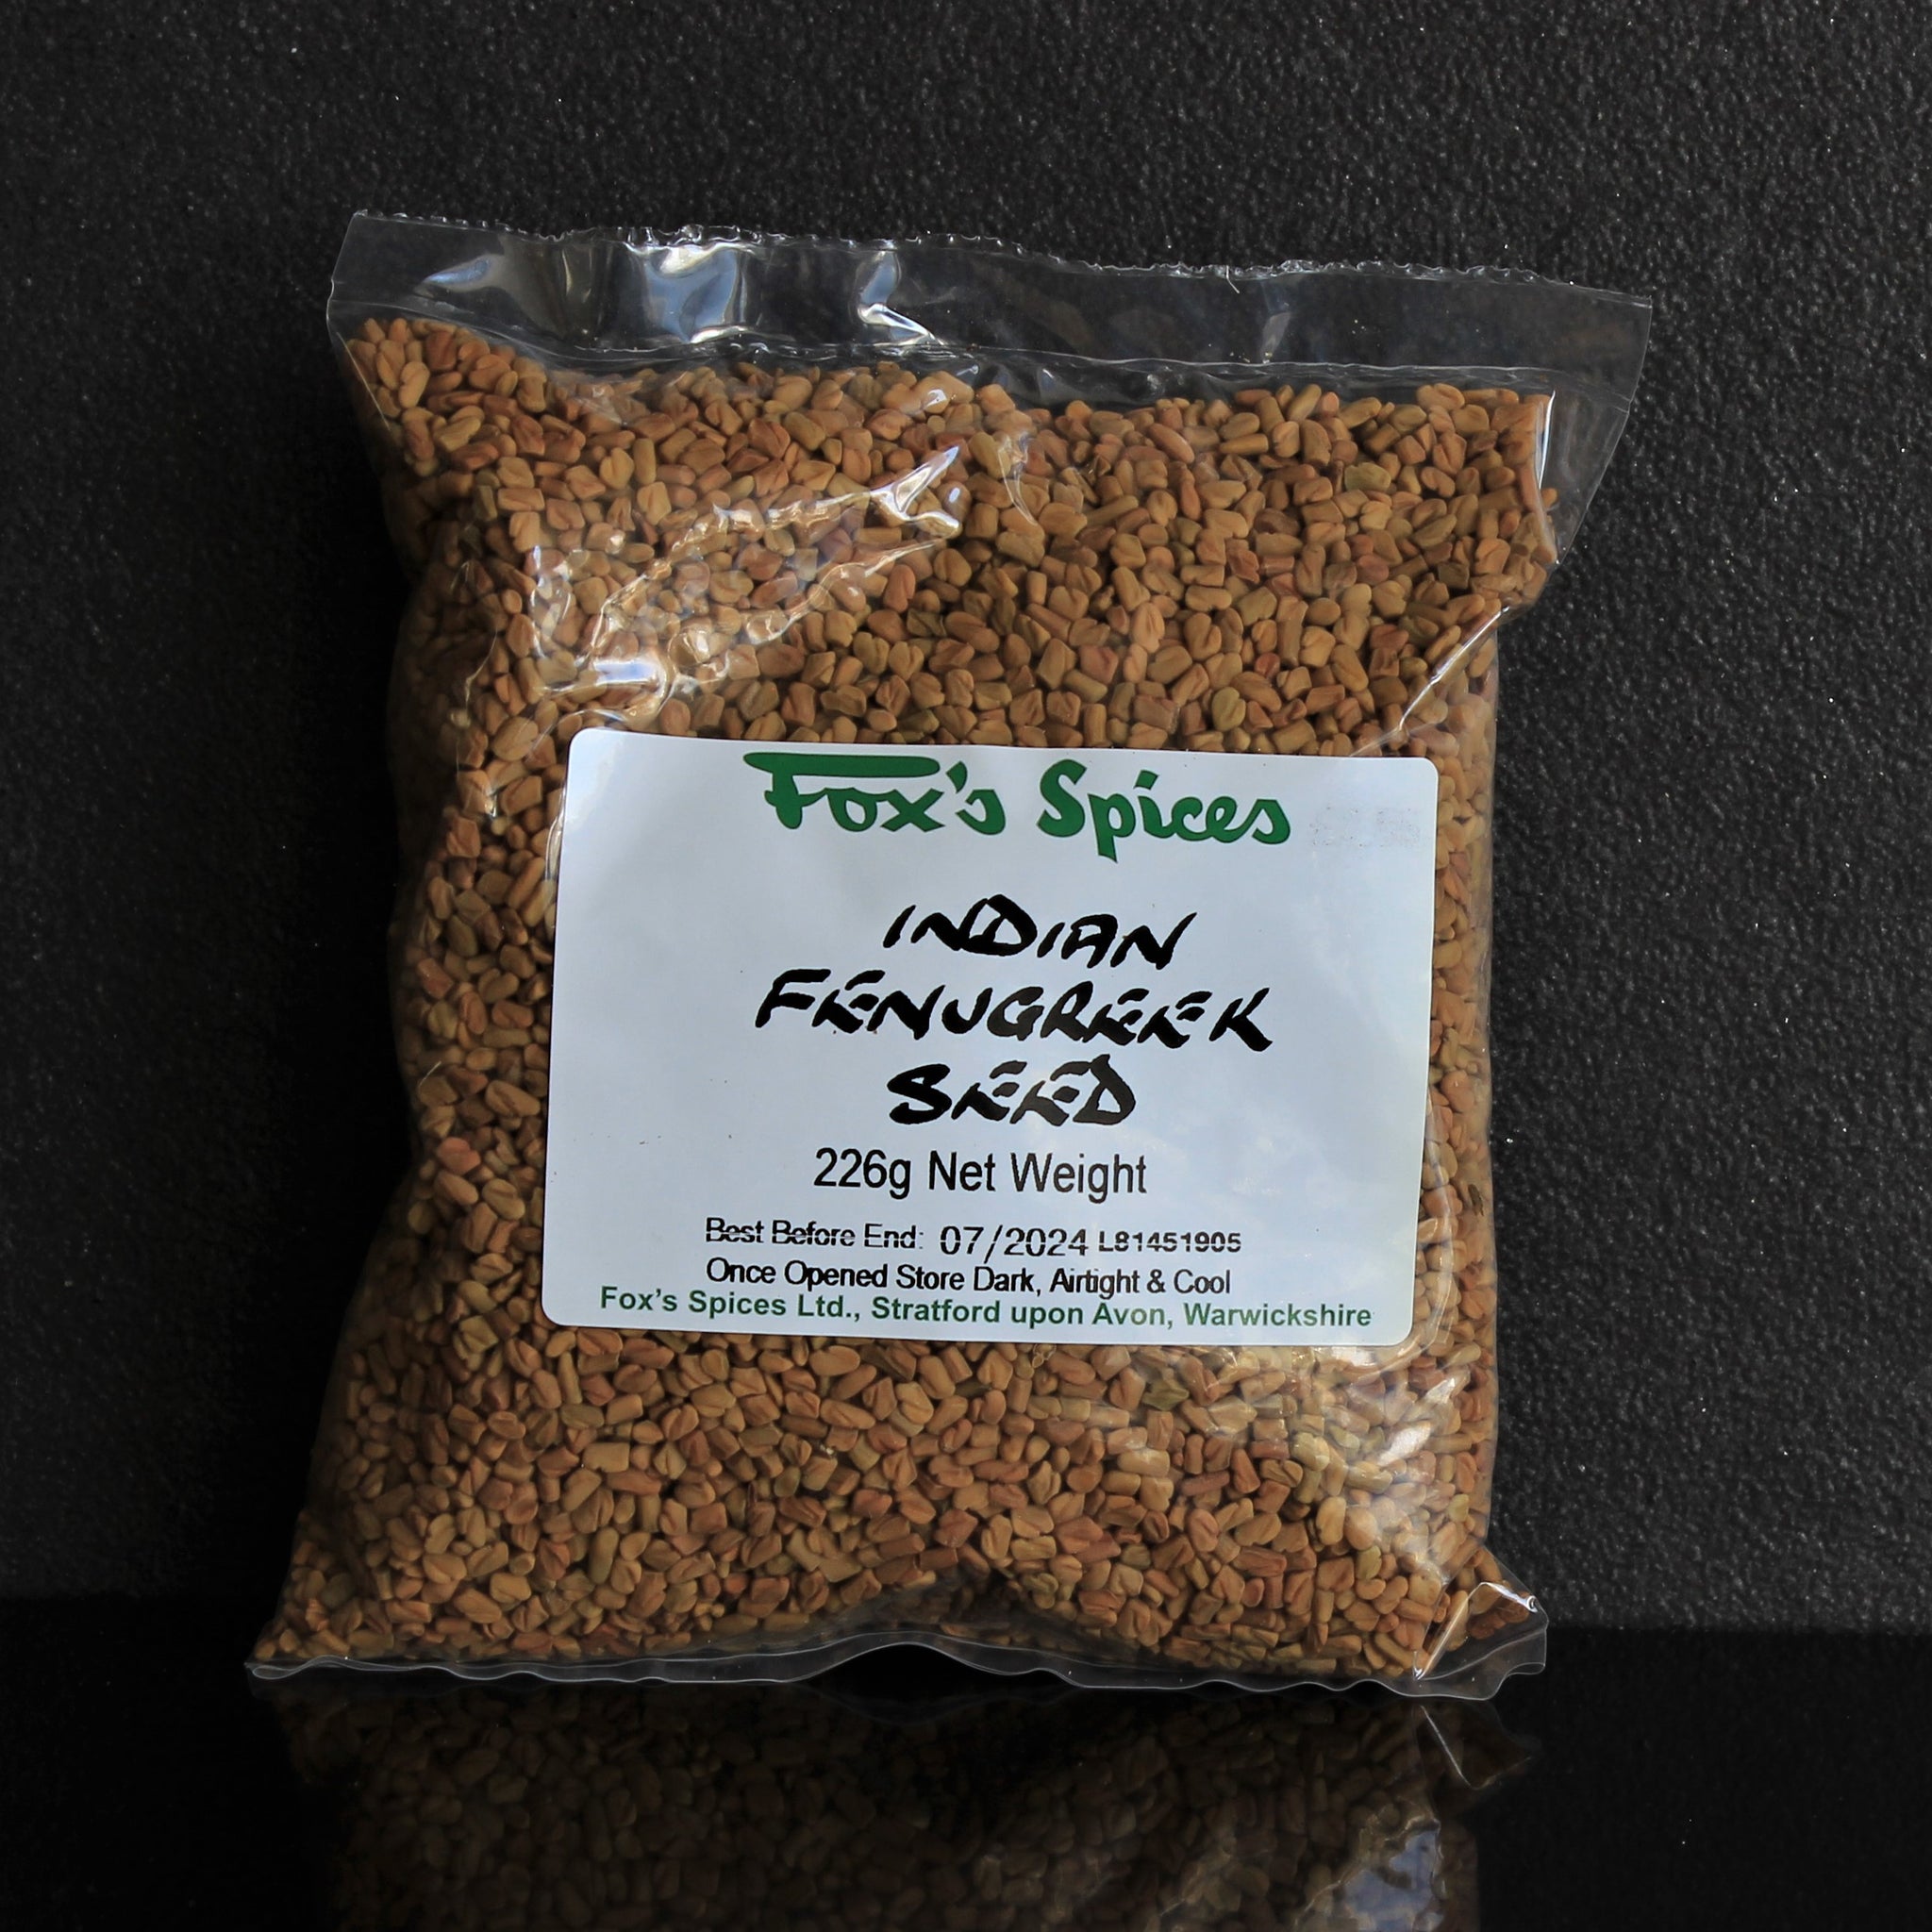 A 226g bag of Fox's Spices Indian Fenugreek seeds